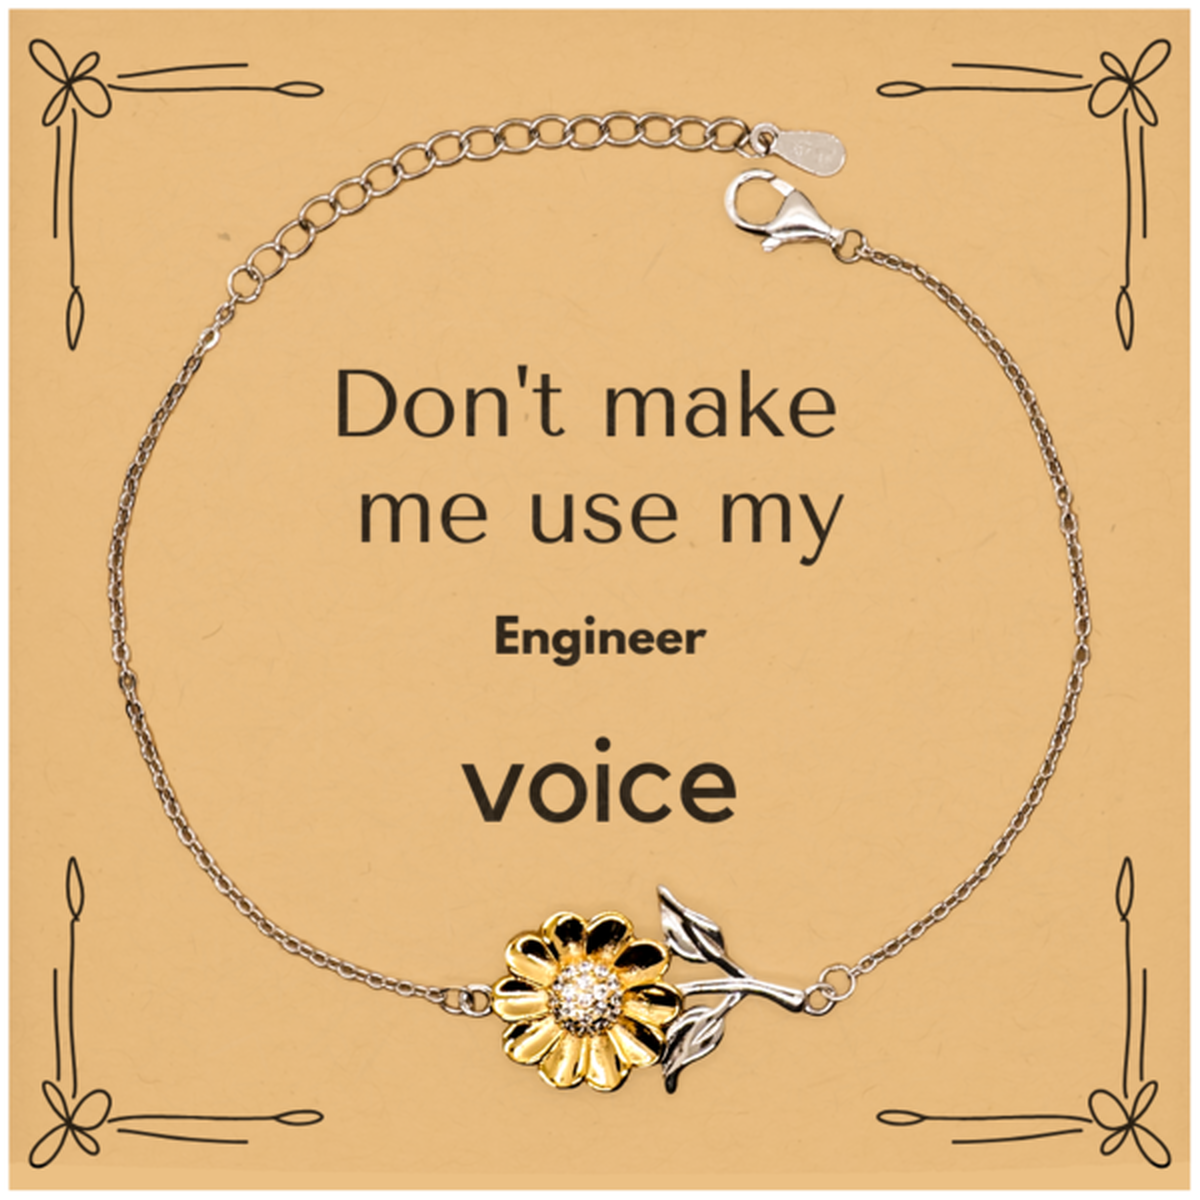 Don't make me use my Engineer voice, Sarcasm Engineer Card Gifts, Christmas Engineer Sunflower Bracelet Birthday Unique Gifts For Engineer Coworkers, Men, Women, Colleague, Friends